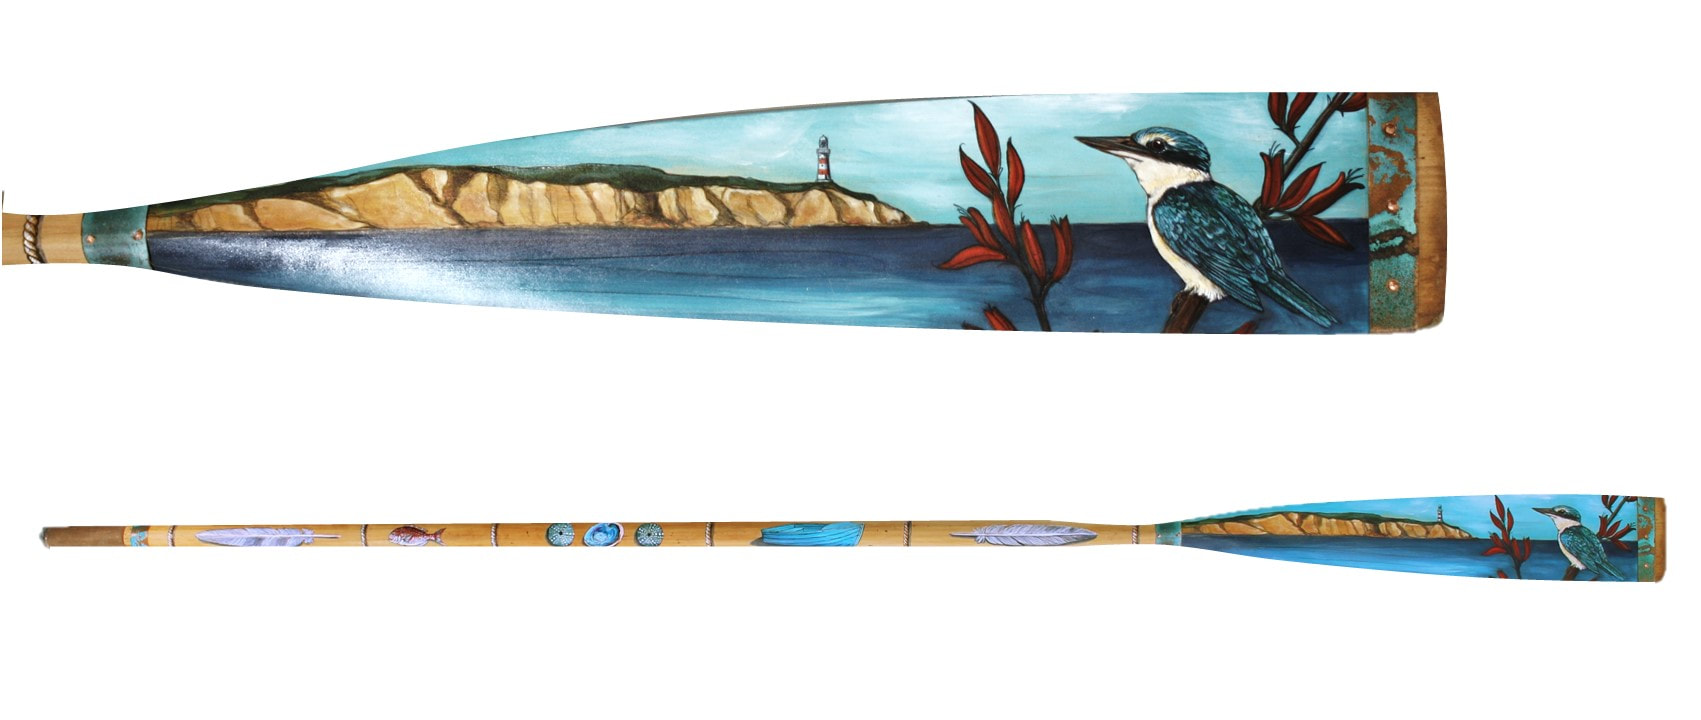 Justine Hawksworth- "Keeping Watch", Acrylic and pencil on wooden oar, Copper details, Approx 2.3m long